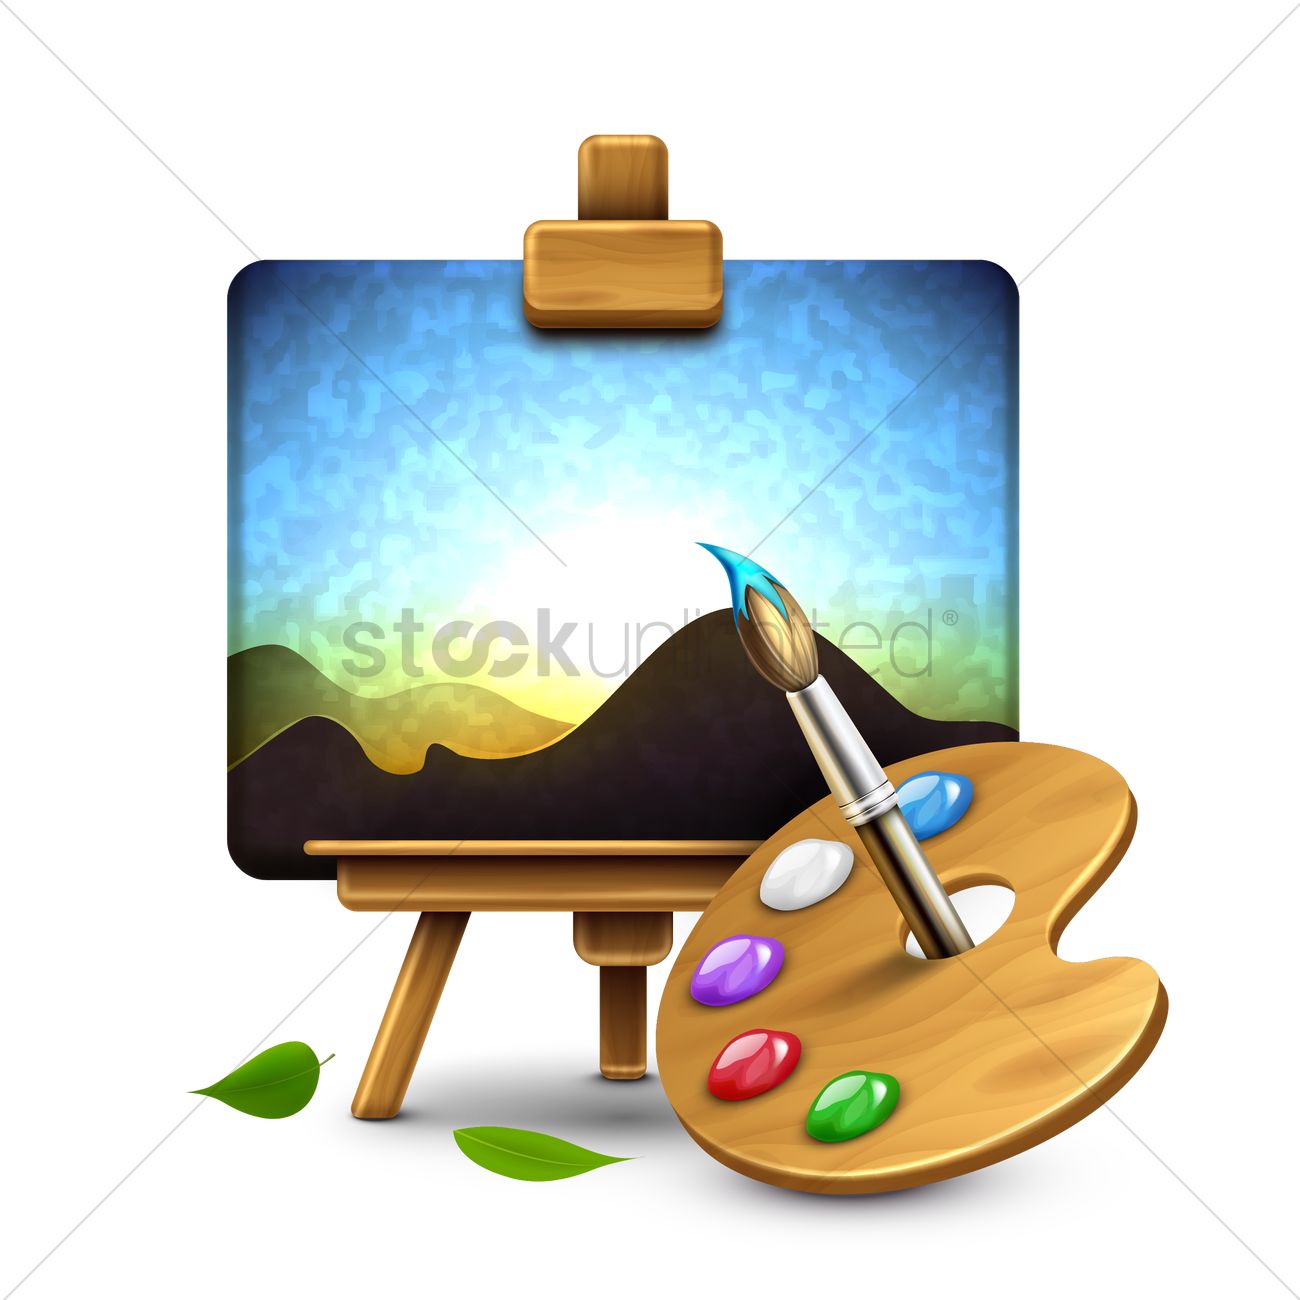 painter clipart board